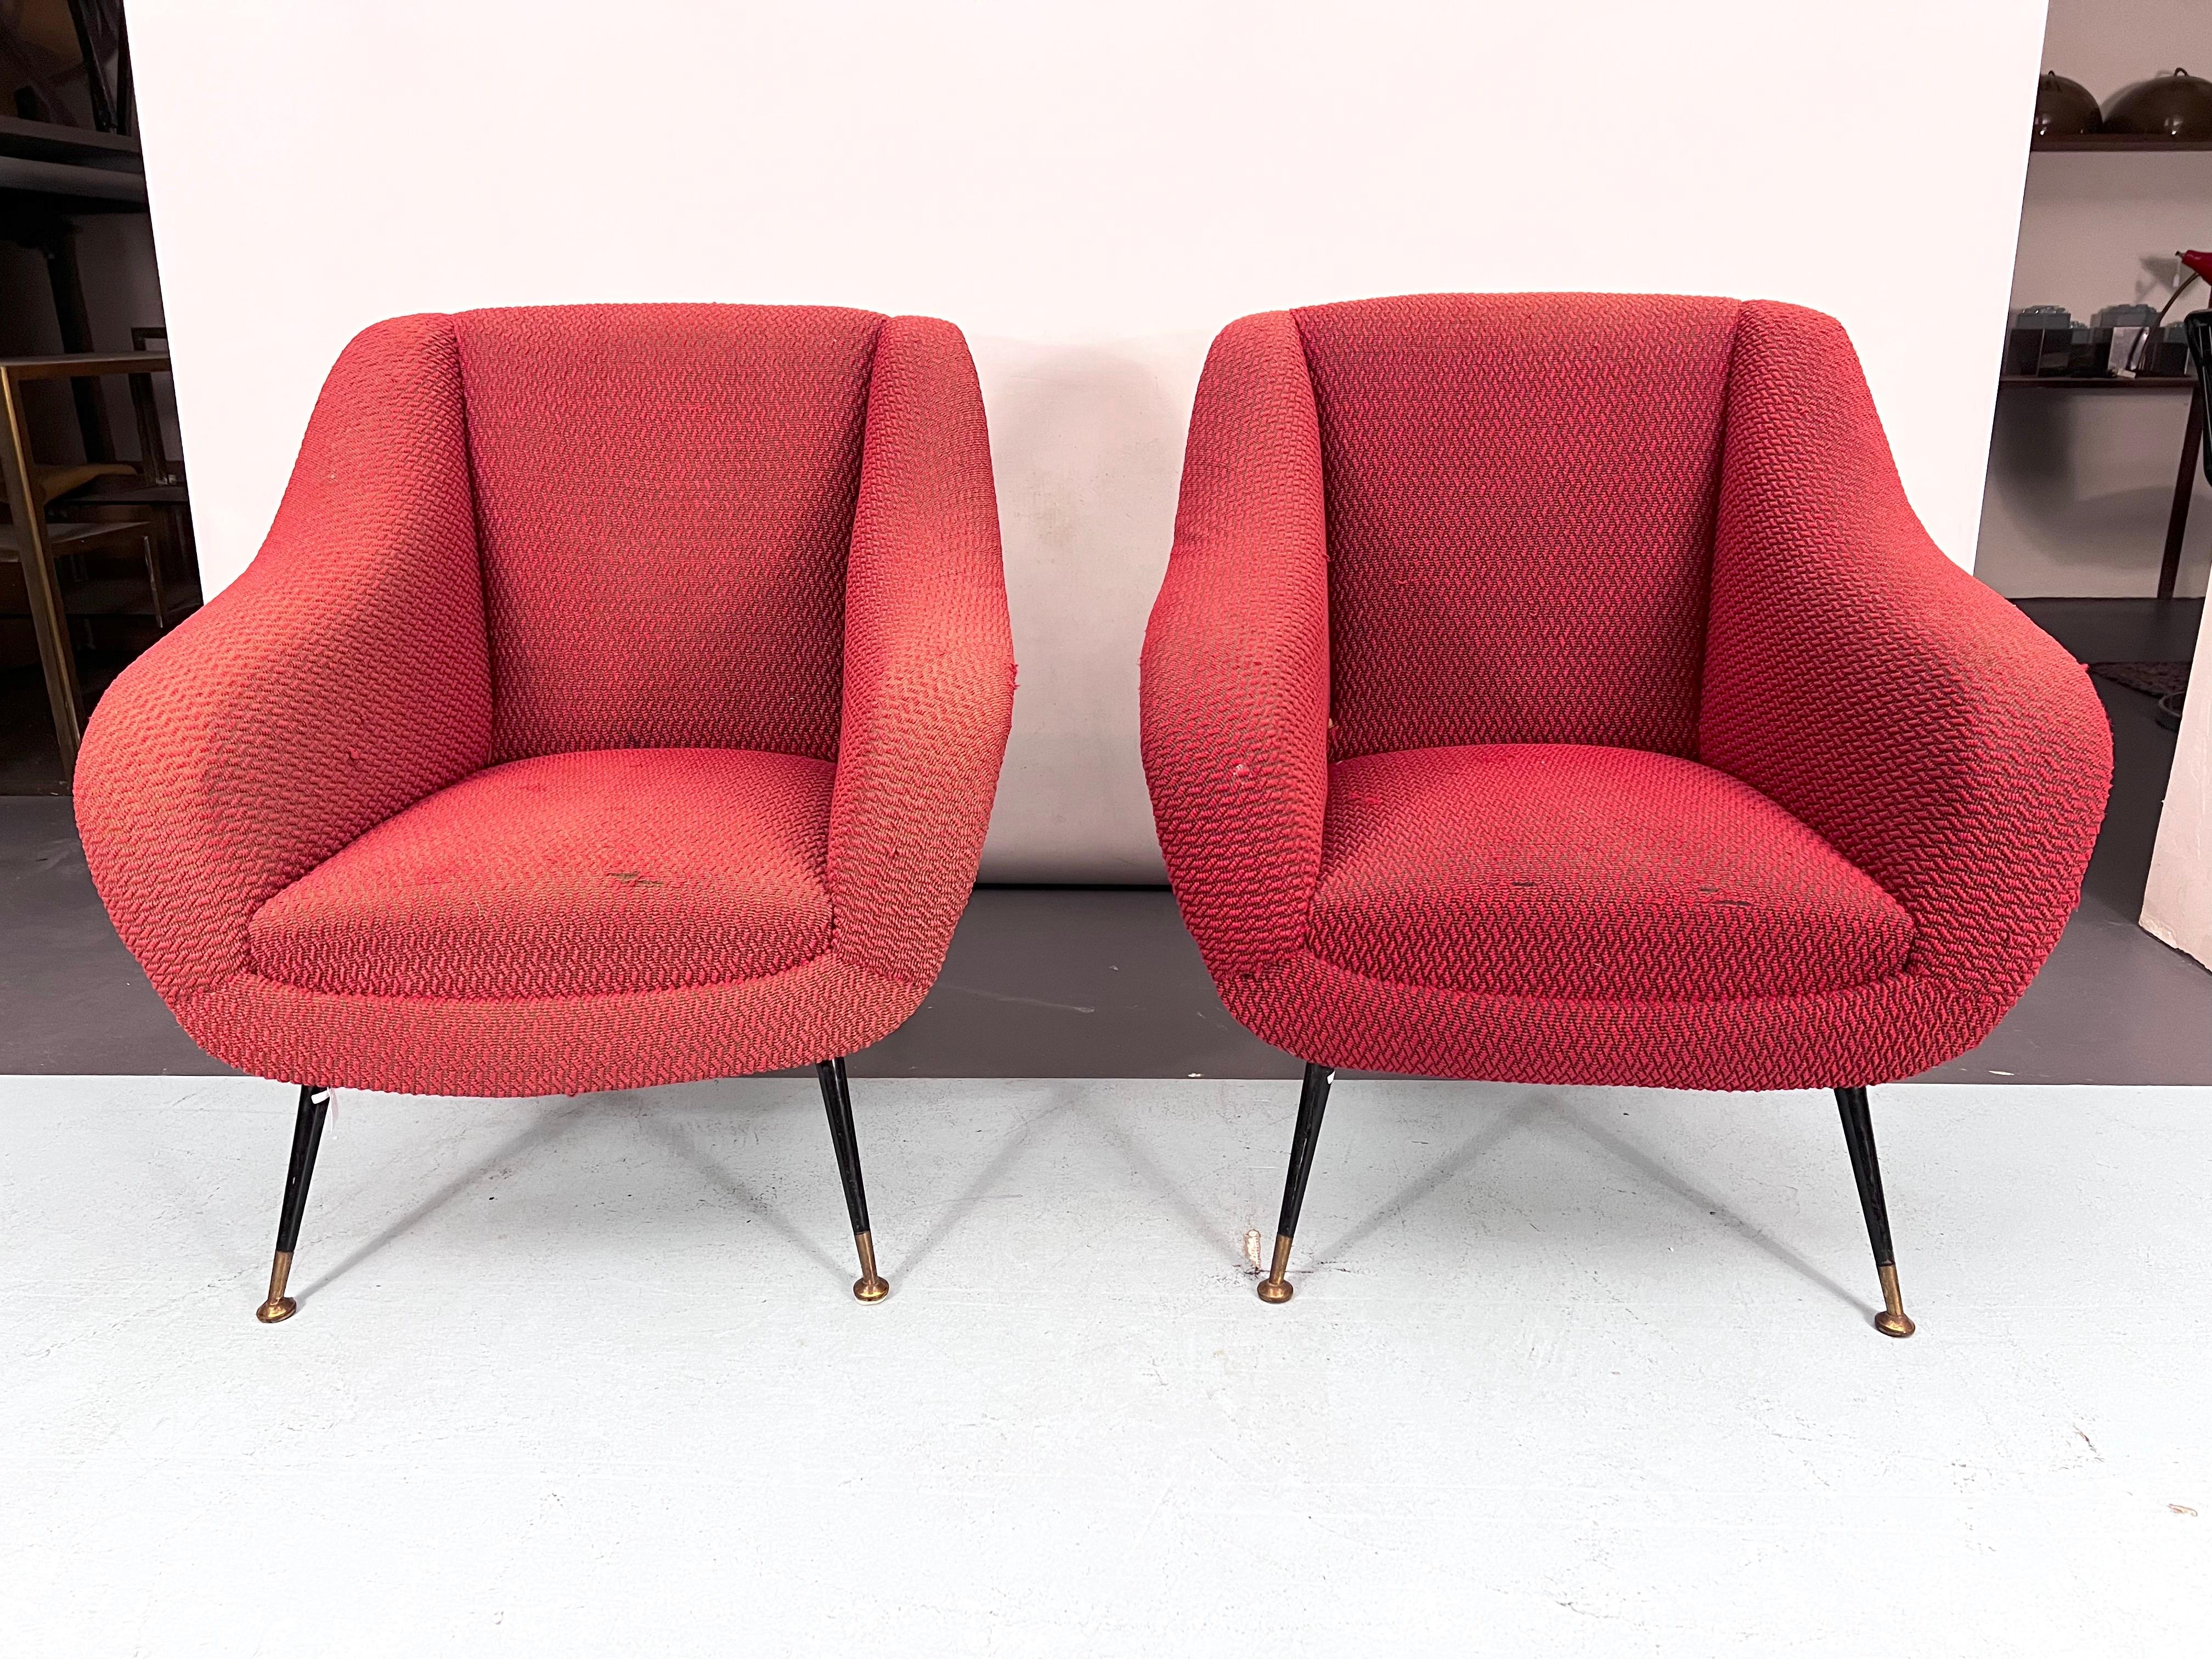 Mid-Century Pair of Lounge Chairs by Gigi Radice for Minotti, Italy, 1950s For Sale 5